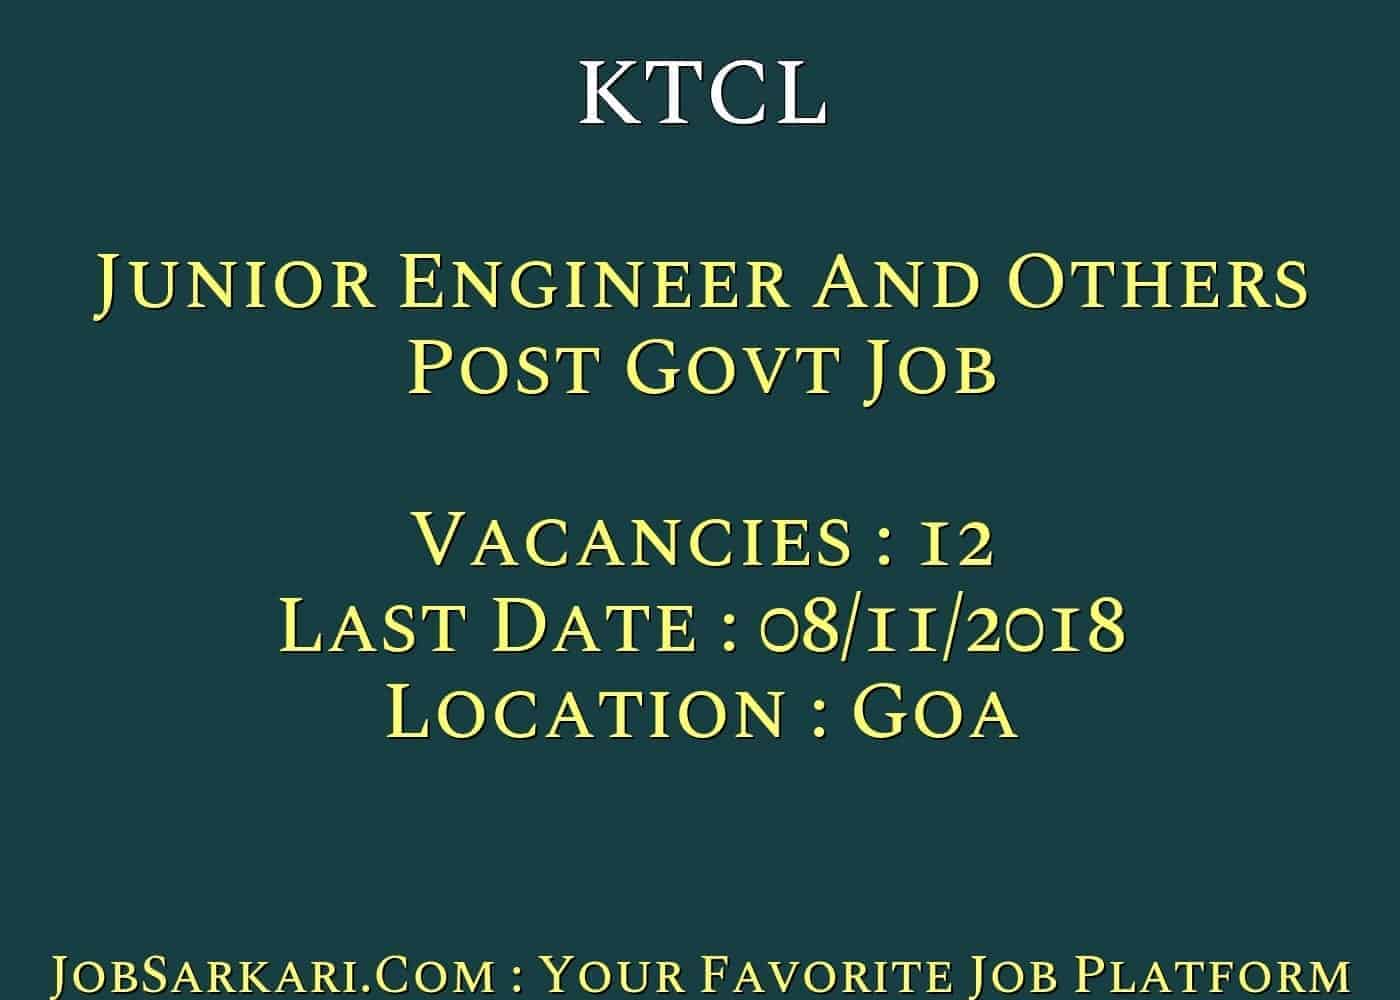 KTCL Recruitment 2018 For Junior Engineer And Others Post Govt Job